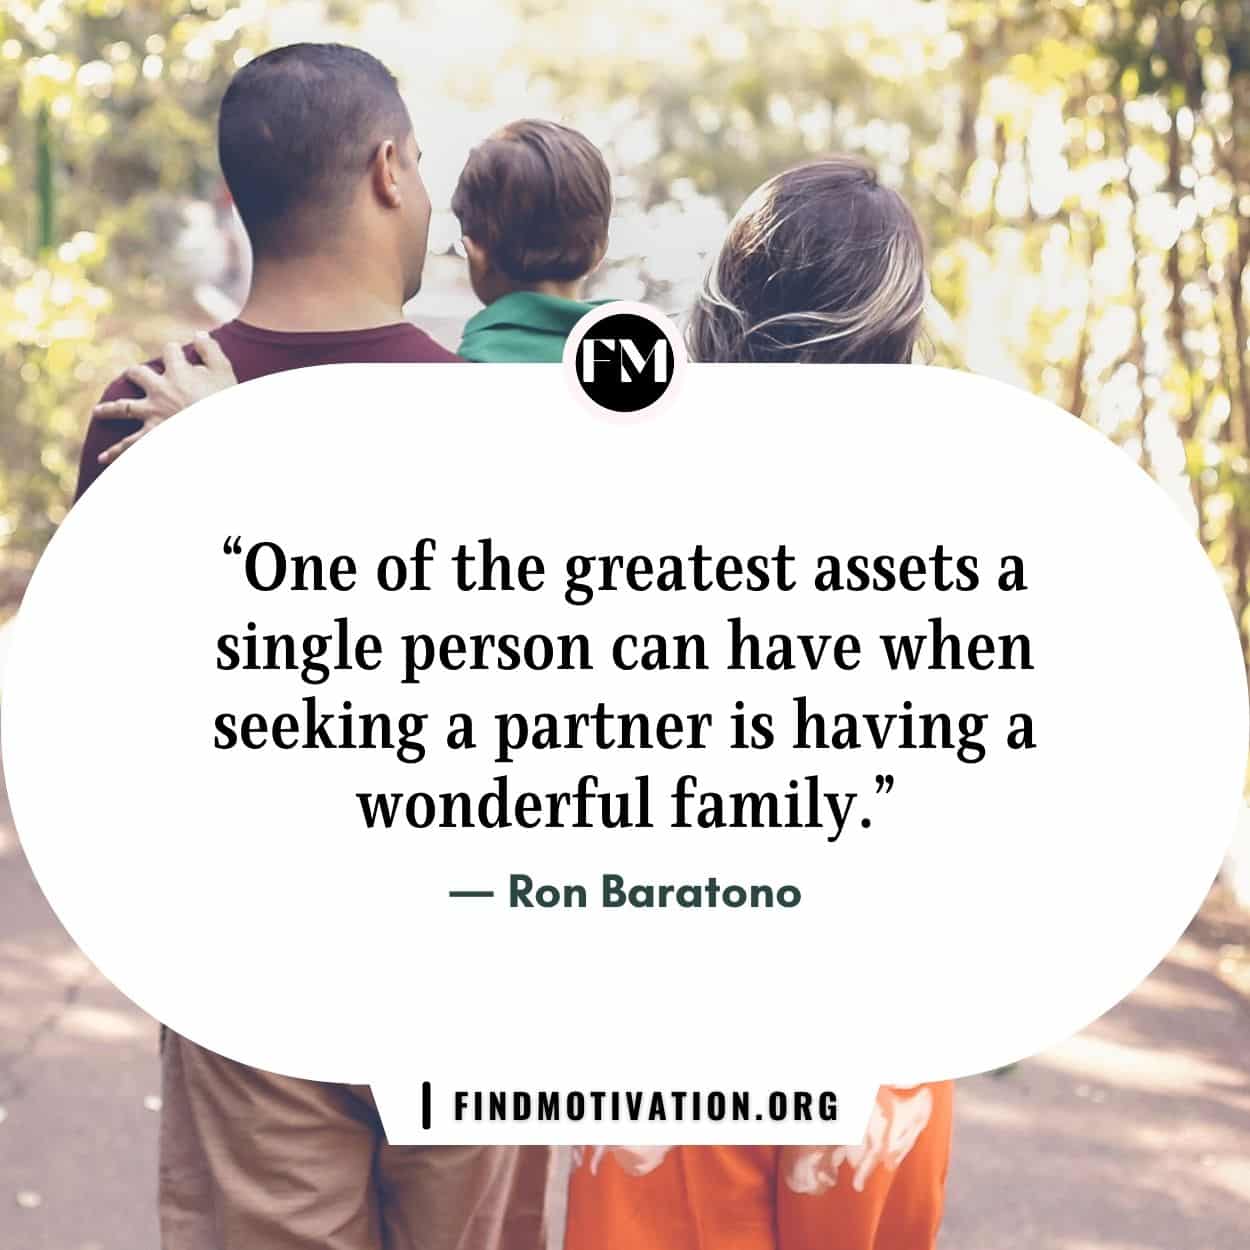 Motivational quotes on family to deepen your memory about you and your family